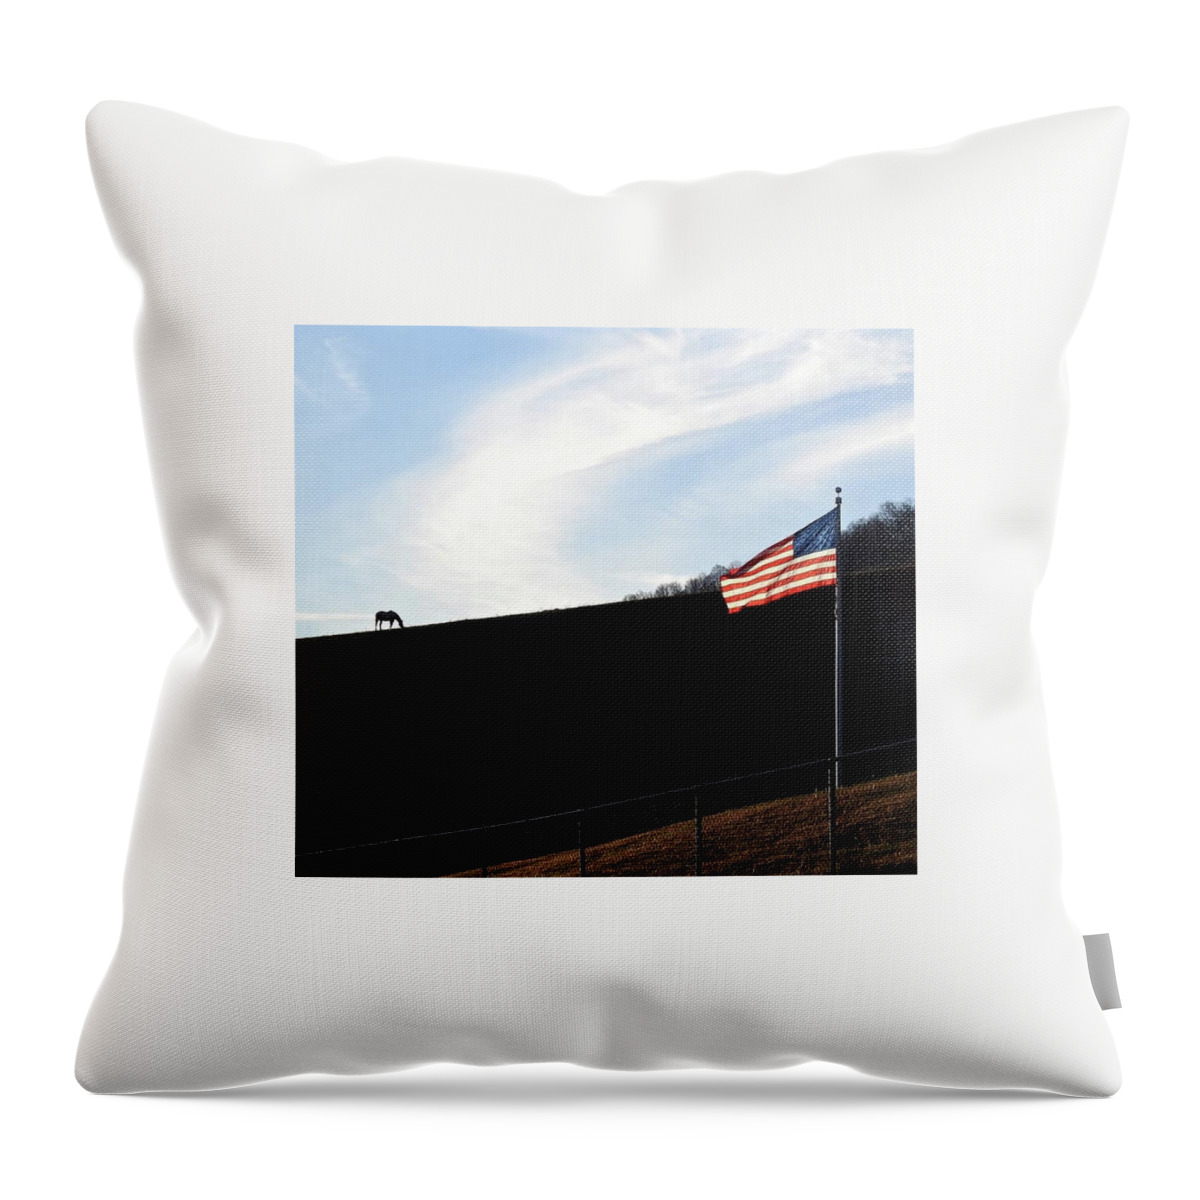 Horse Throw Pillow featuring the photograph Horse and Flag by Kathy Ozzard Chism